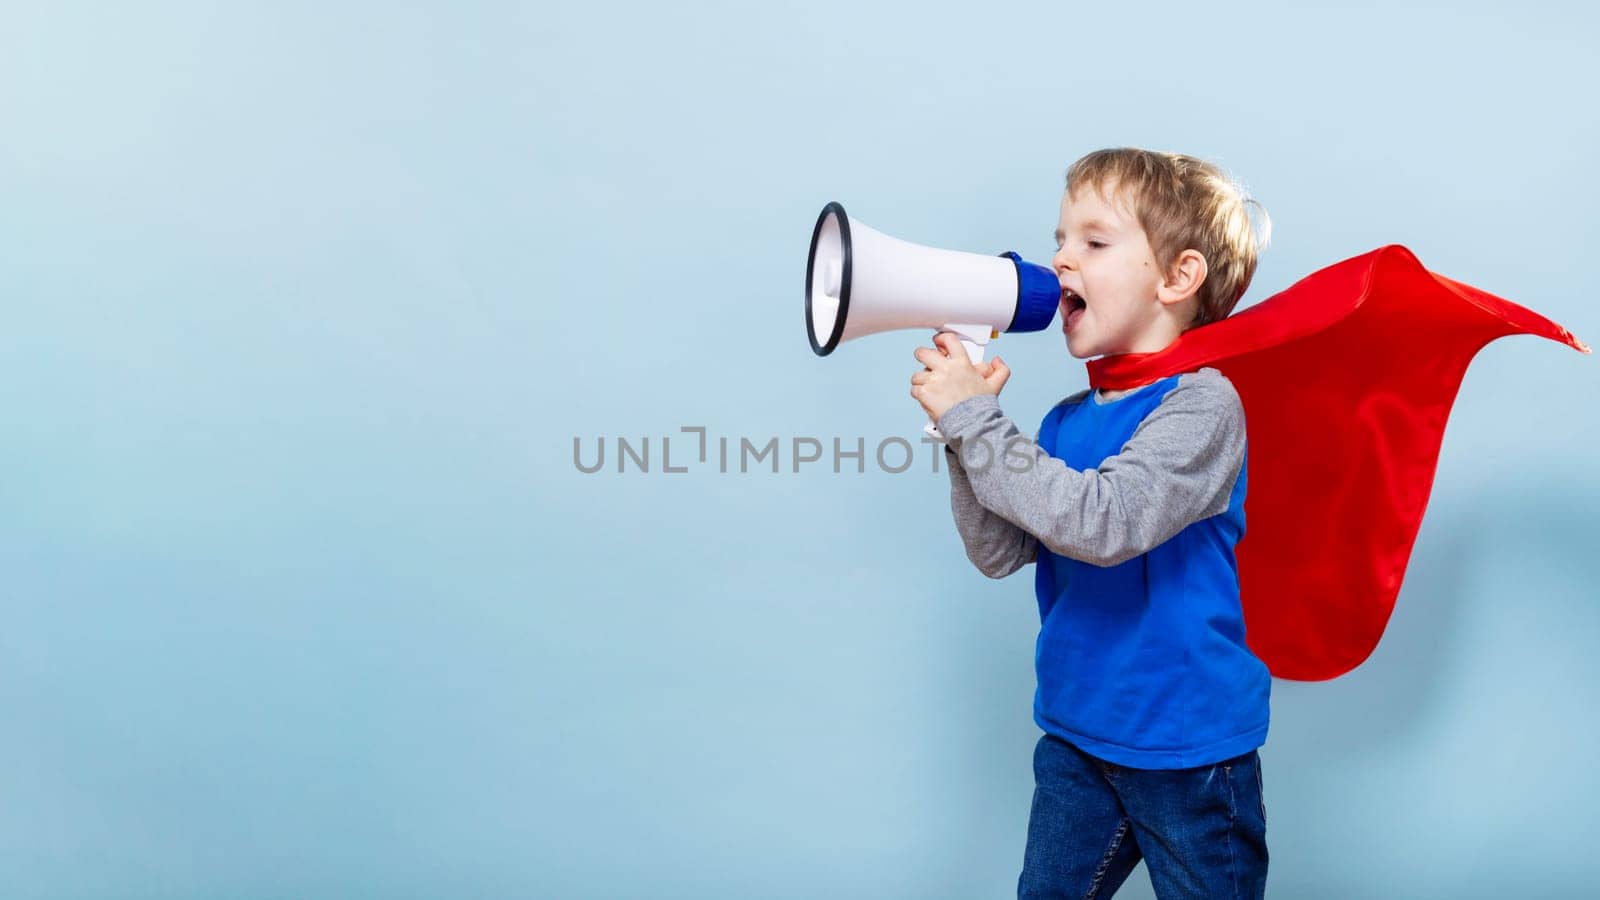 Child in Cape with Megaphone on Blue Background by andreyz